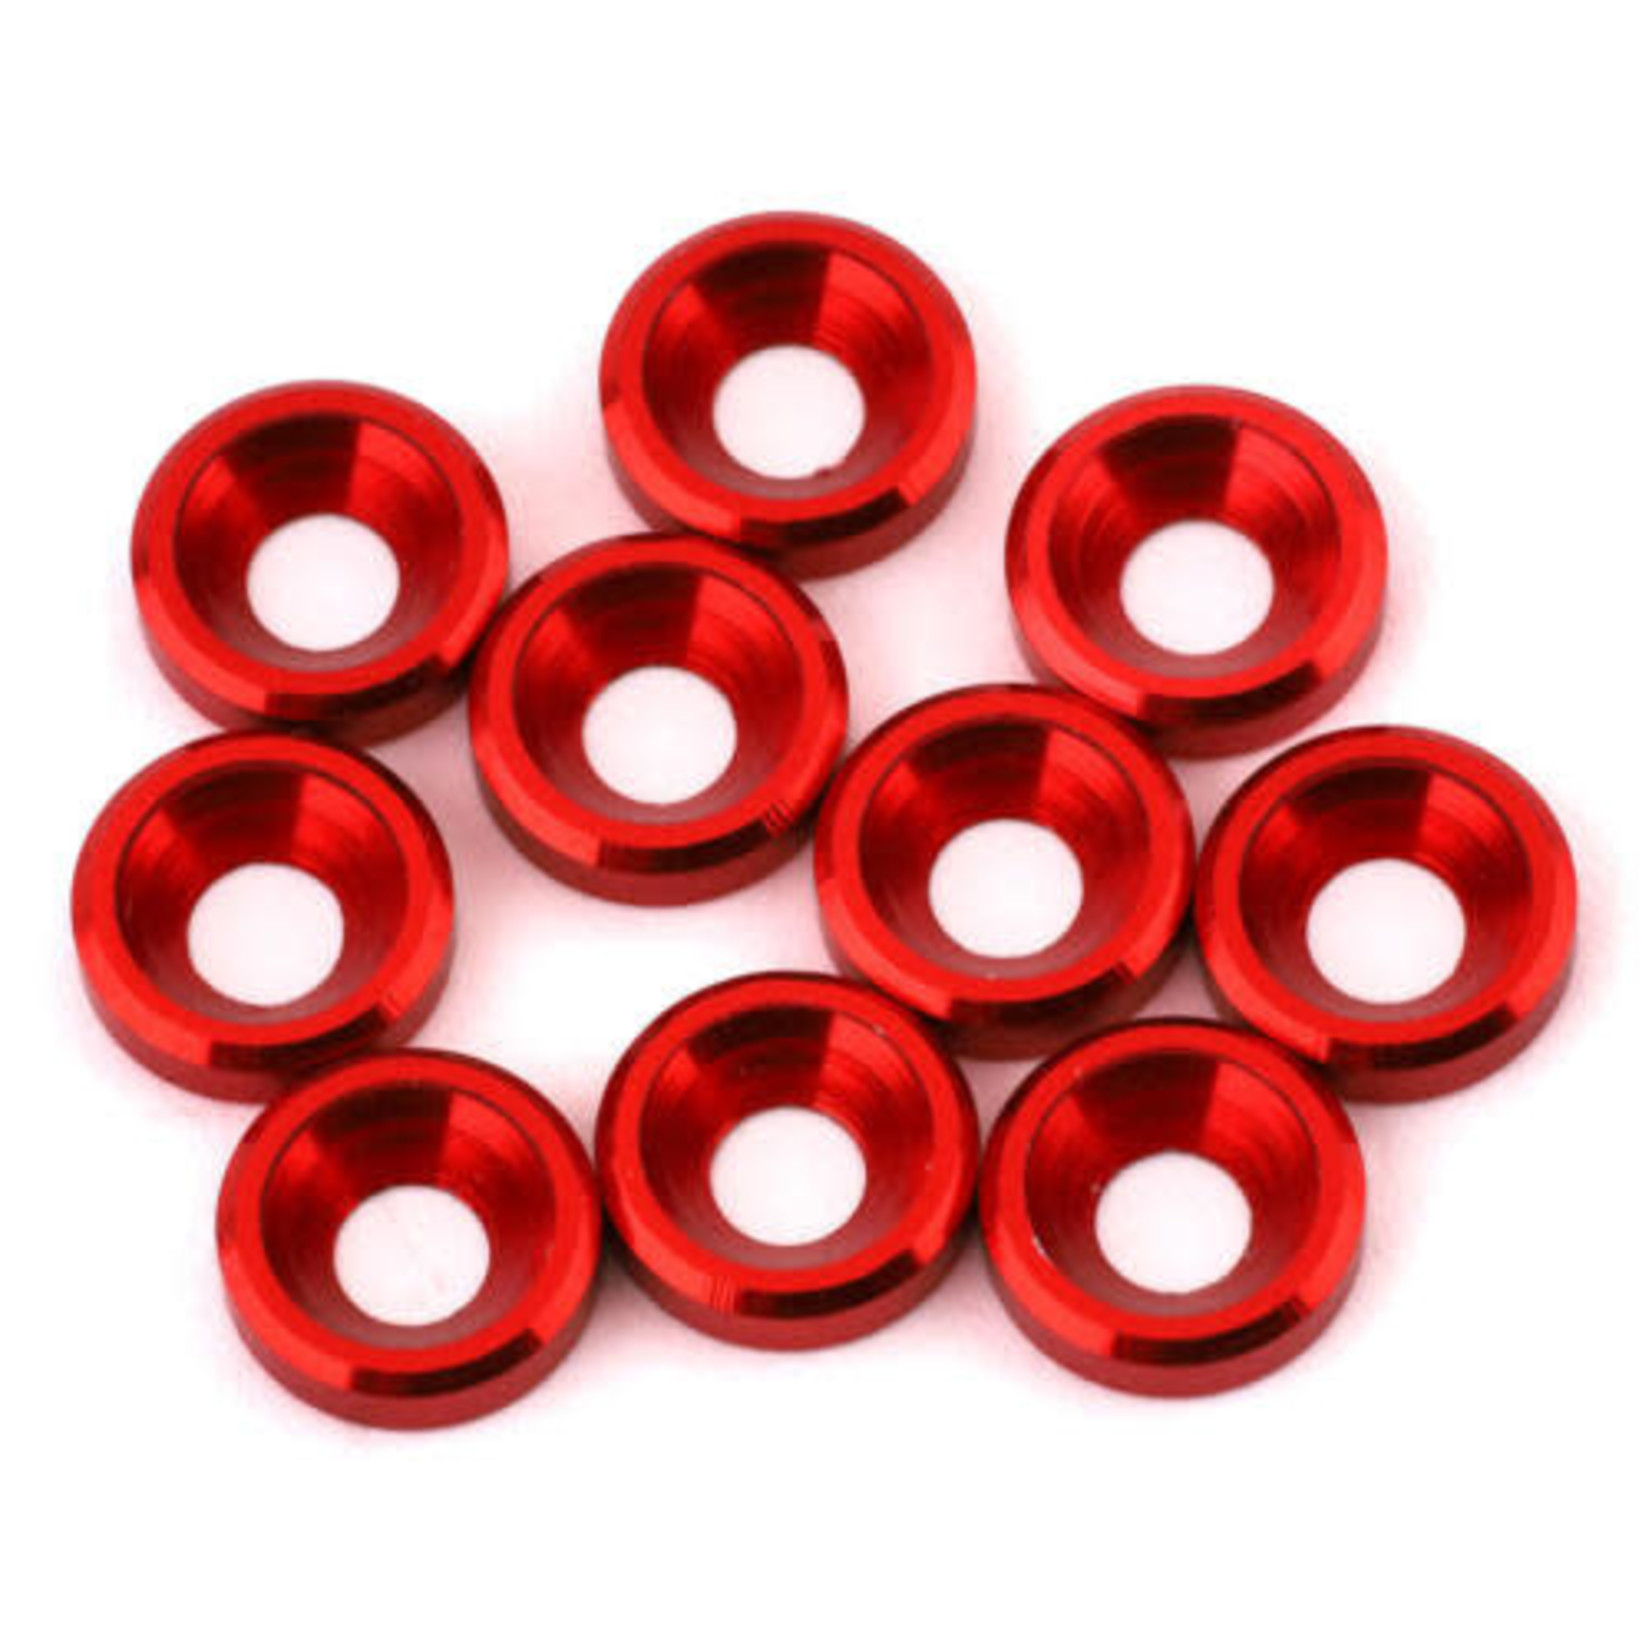 DragRace Concepts DRC-0760.1   DragRace Concepts 3mm Countersunk Washers (Red) (10)